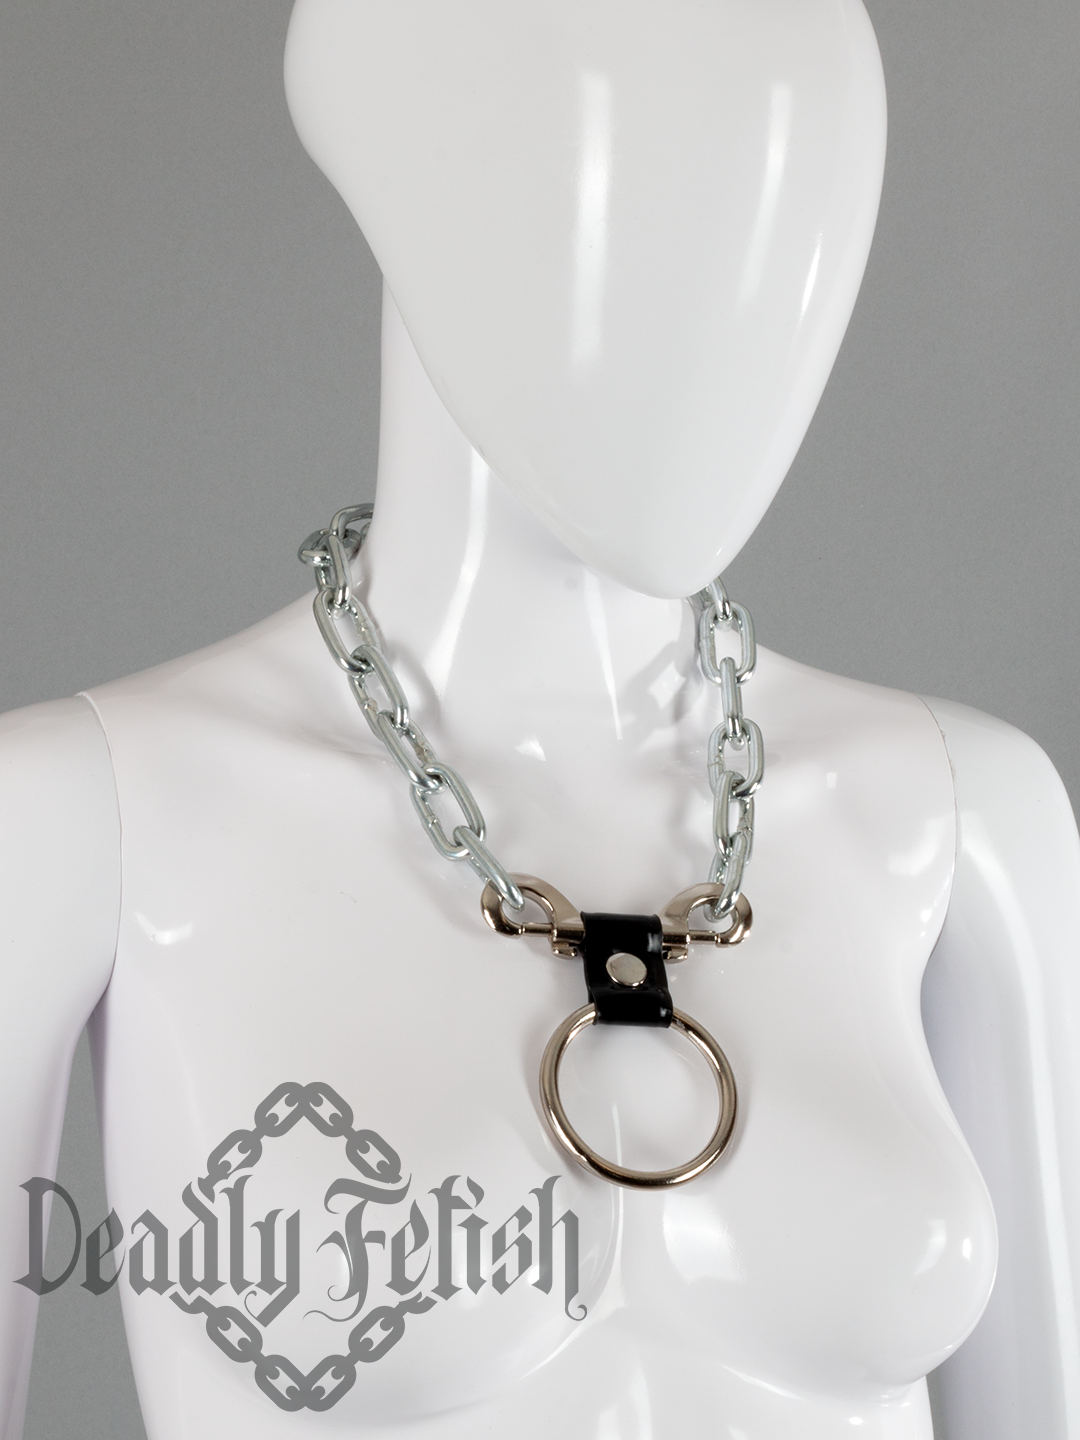 Deadly Fetish Made-to-Order Latex: Collar #27